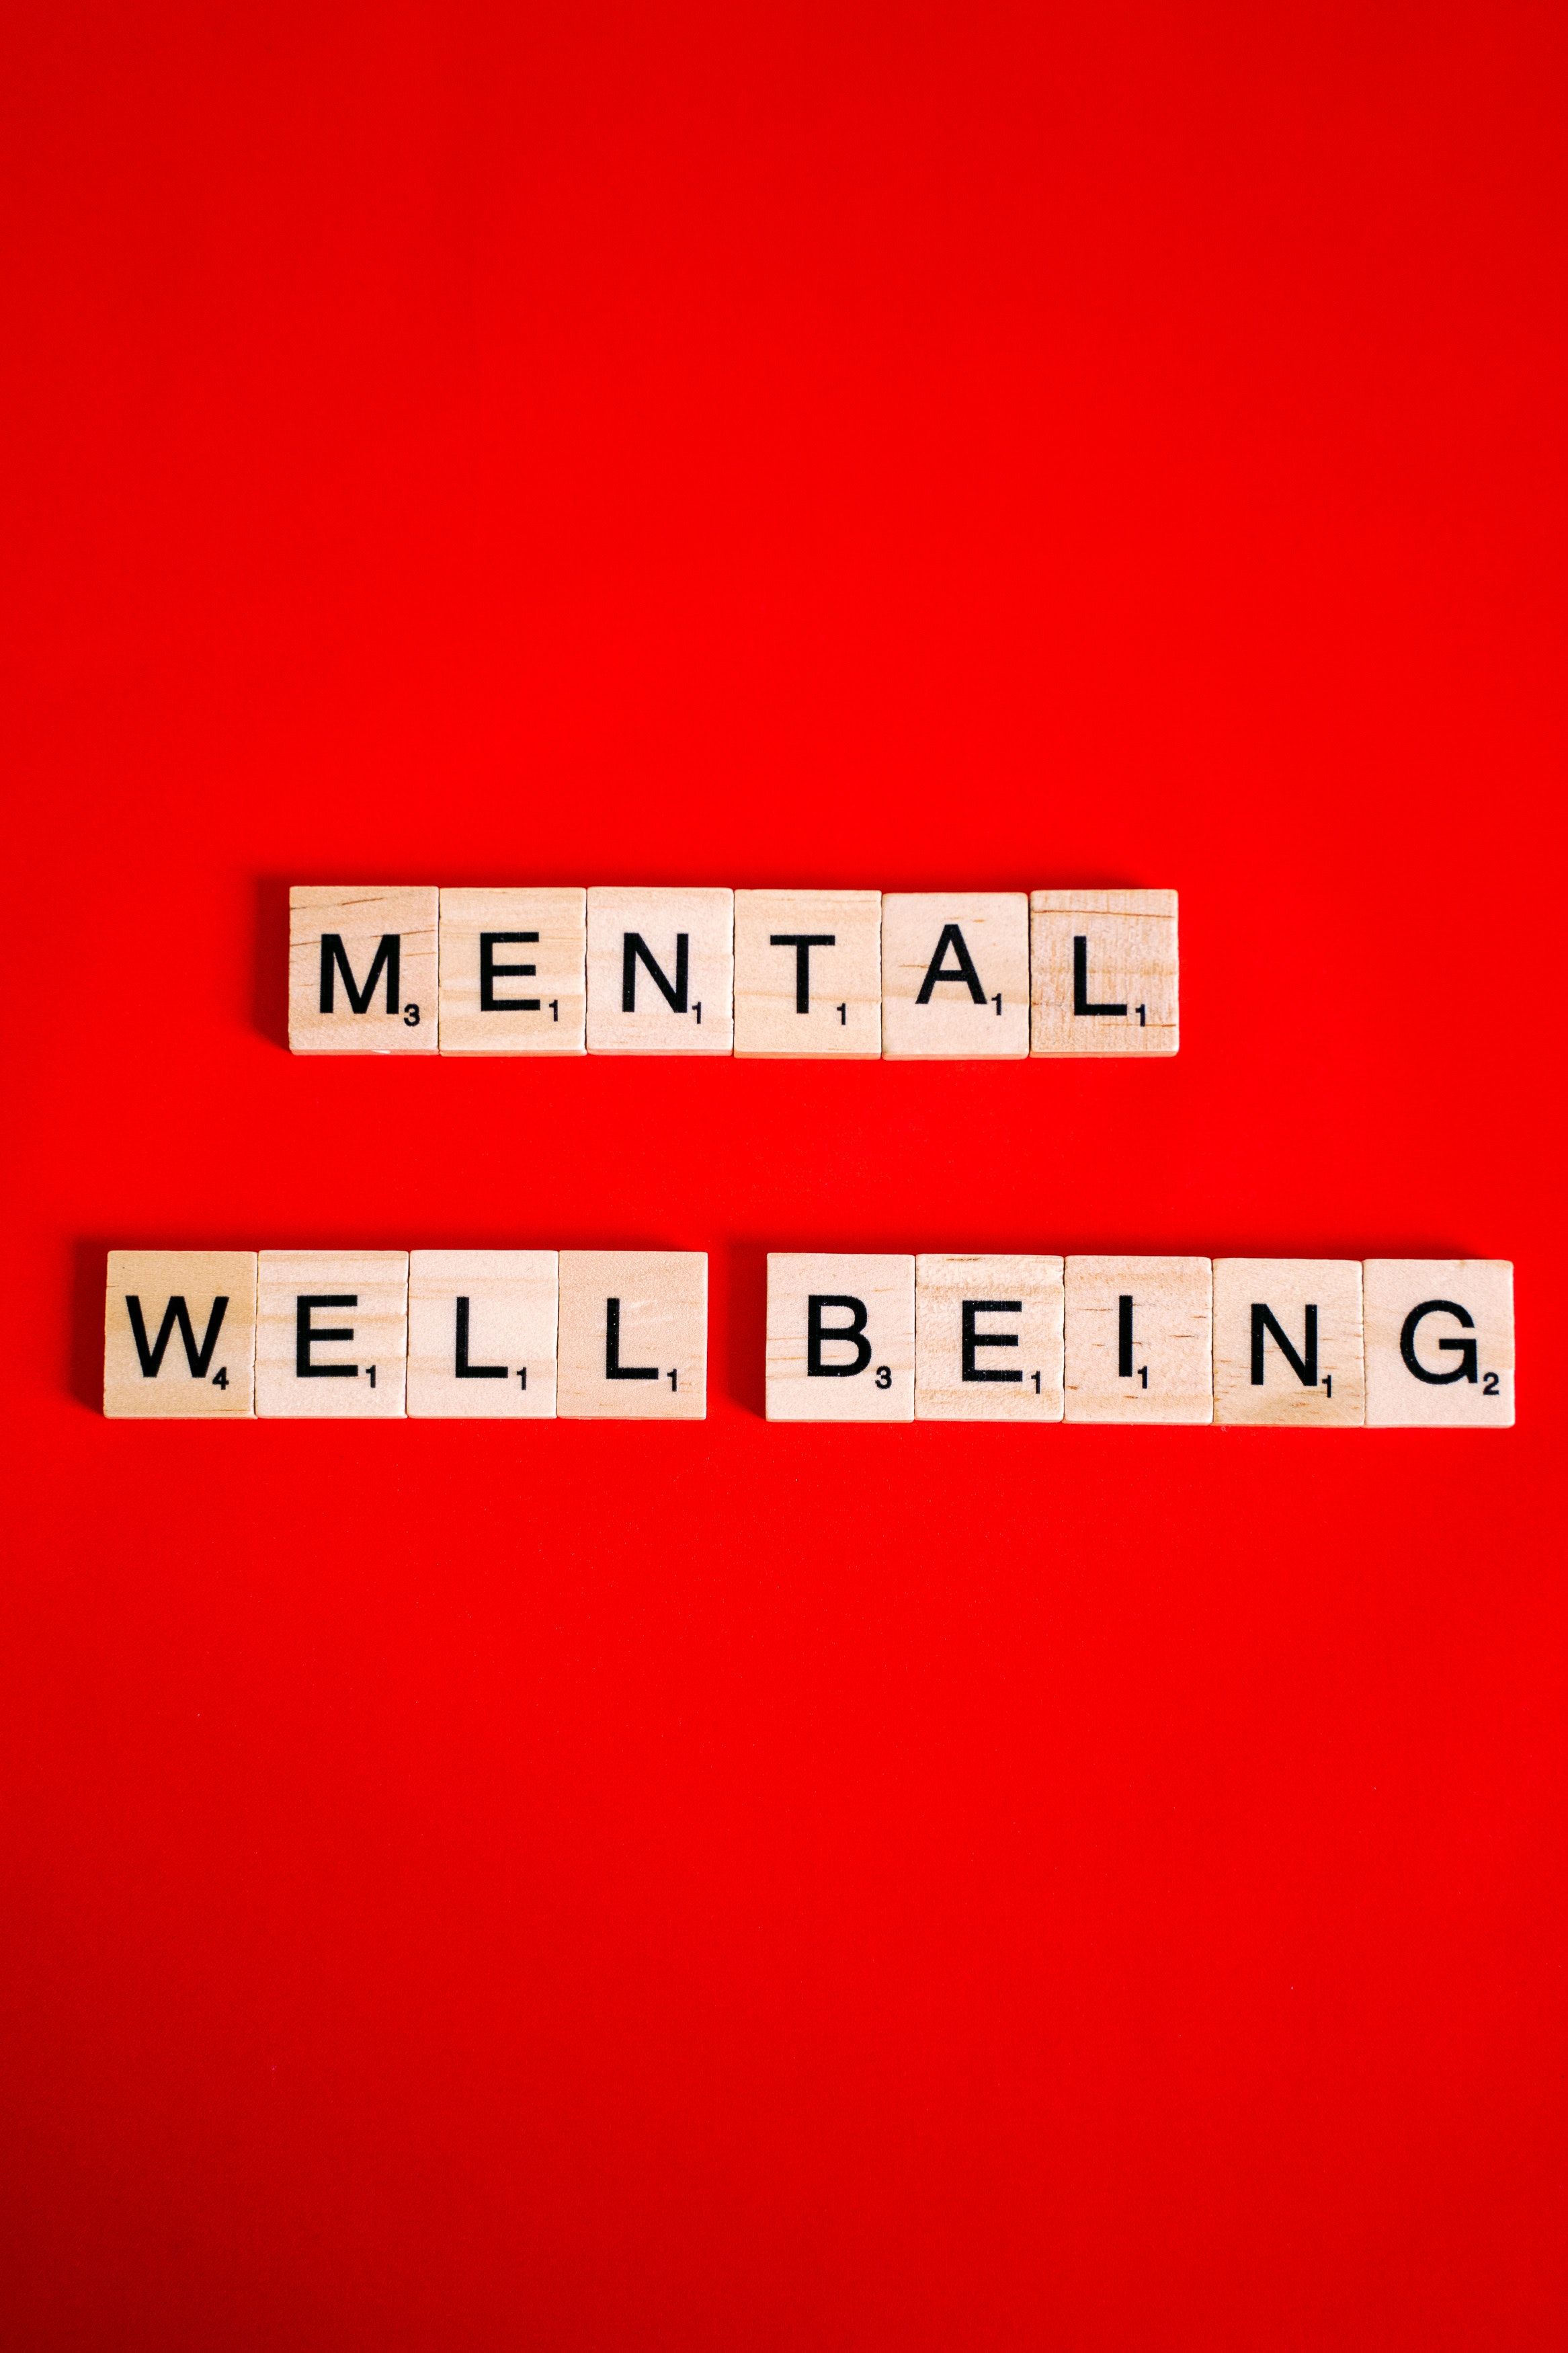 Mental Well Being. May Is Mental Health Awareness Month